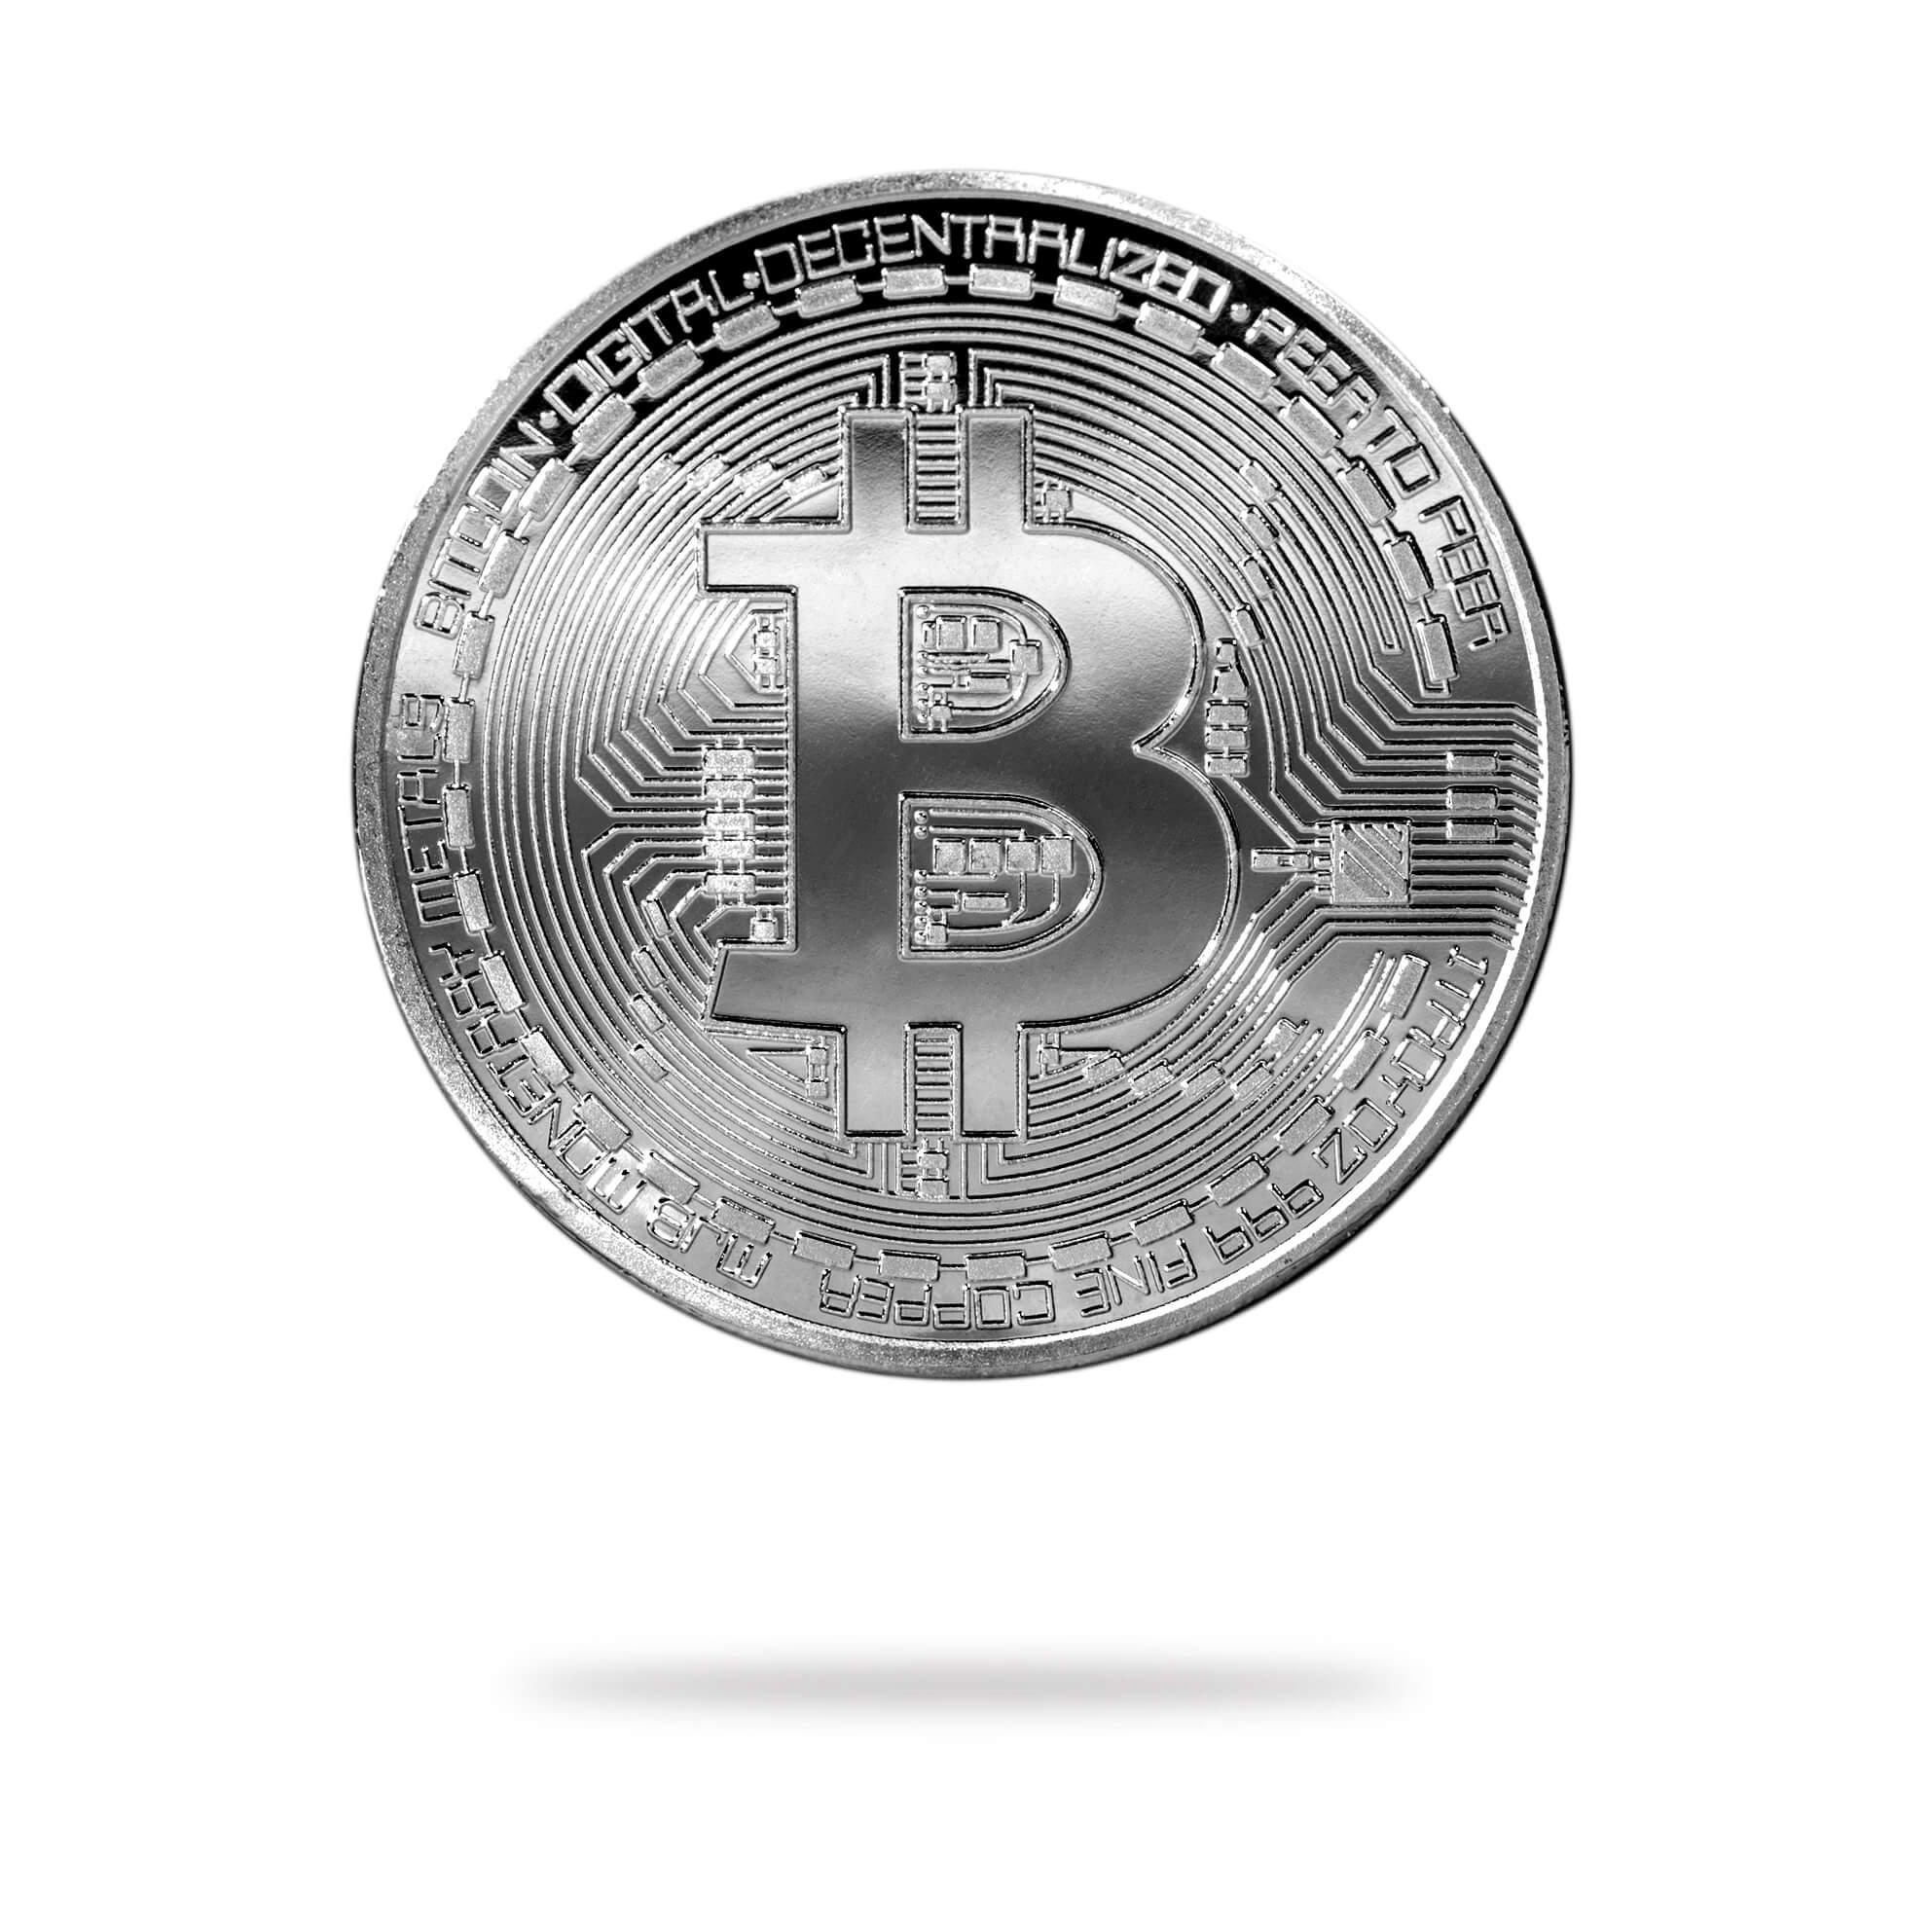 Cryptochips | Classic Bitcoin Physical Crypto Coin. Collectable cryptocurrency merch you can hodl